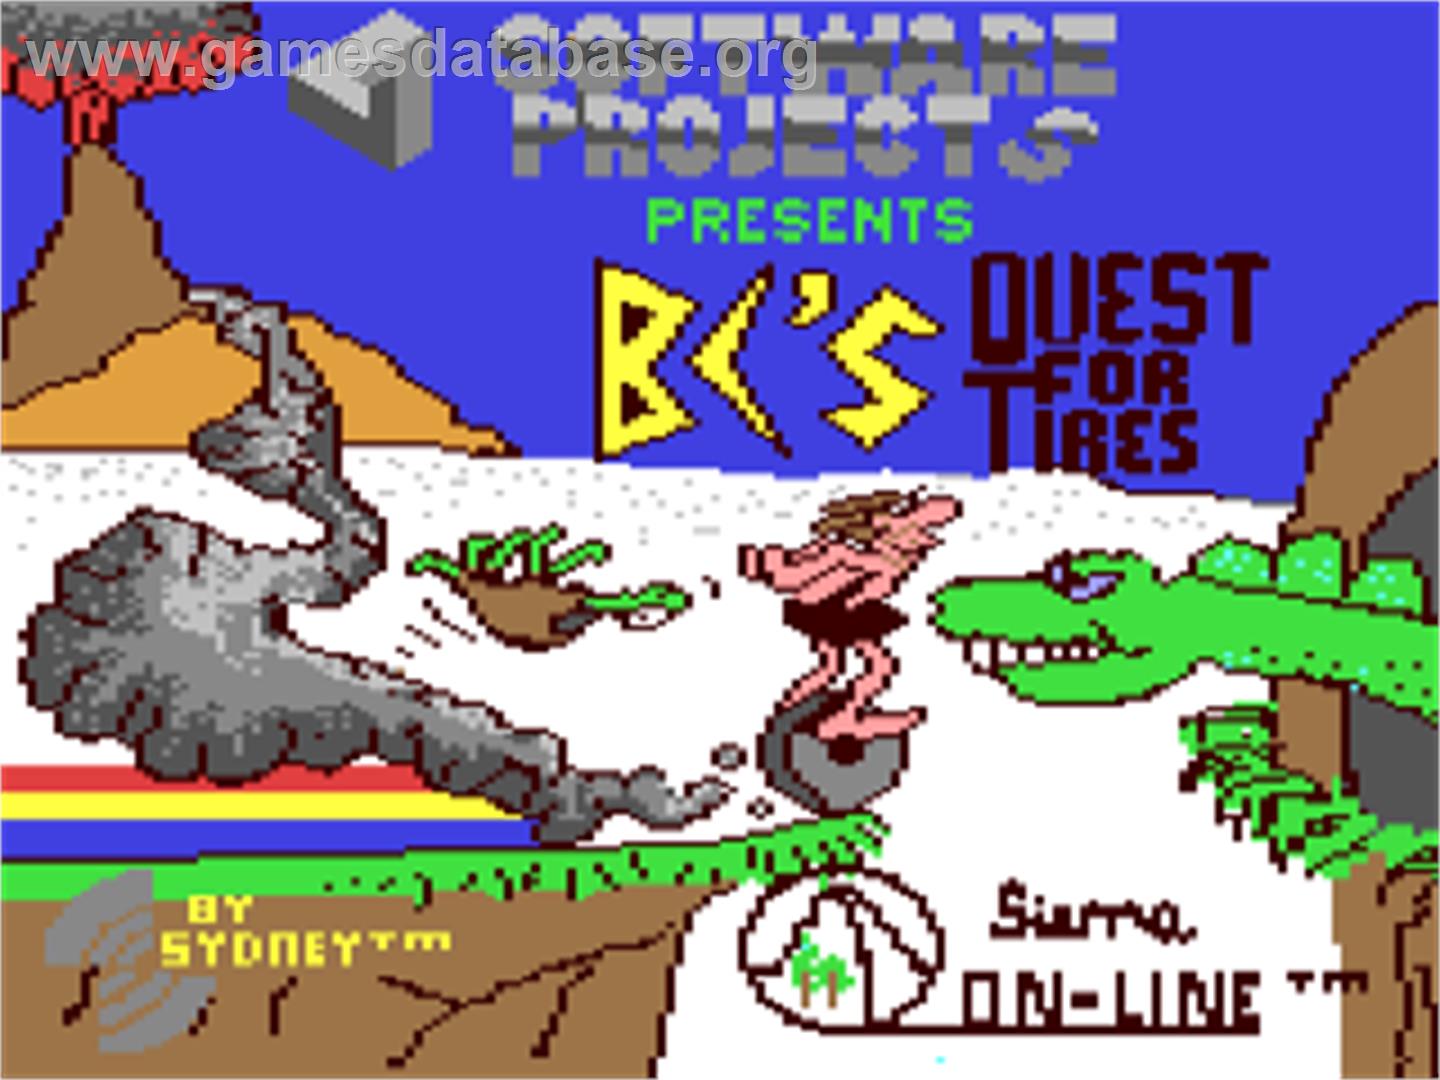 BC's Quest for Tires - Commodore 64 - Artwork - Title Screen